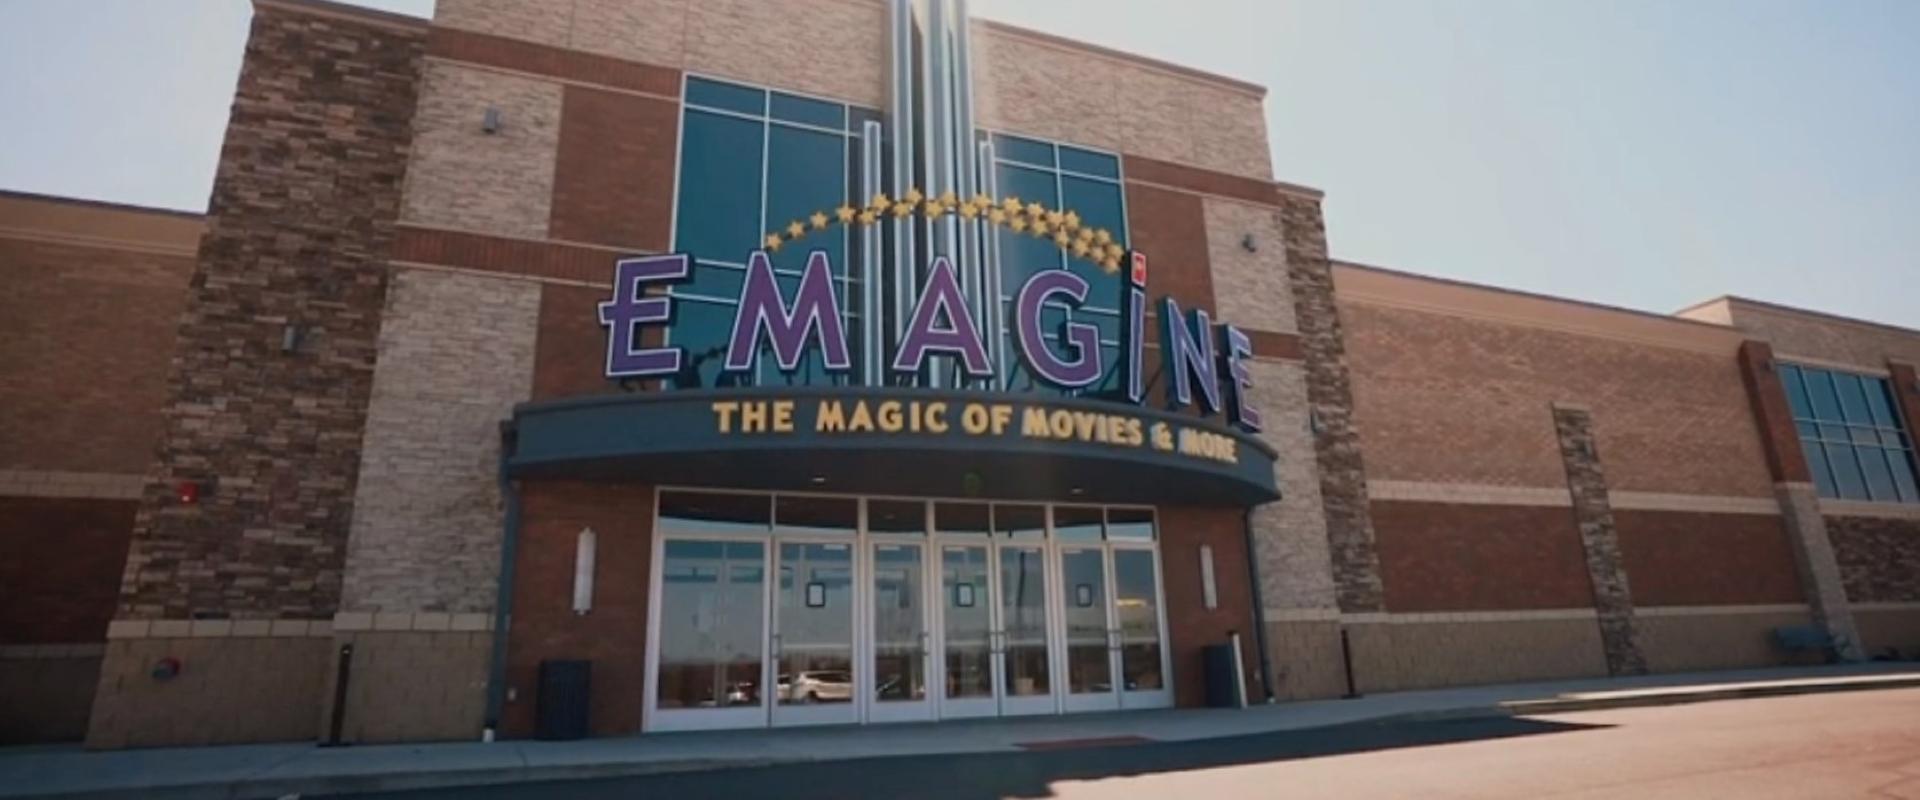 emagine theater shelby township